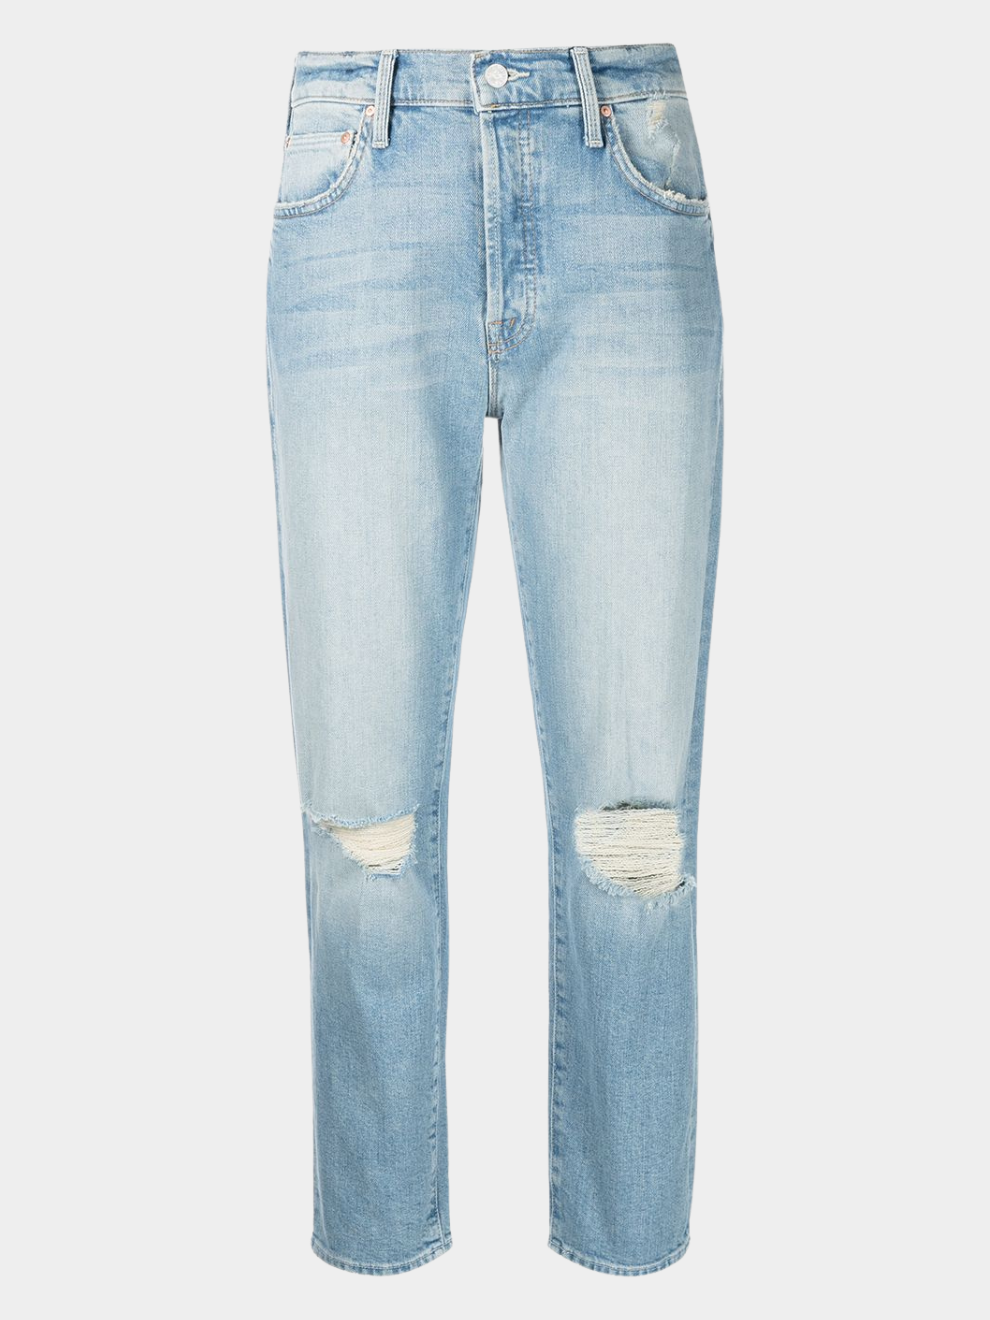 MOTHER denim jeans. The Scrapper Ankle in Bless you Again blue with rips